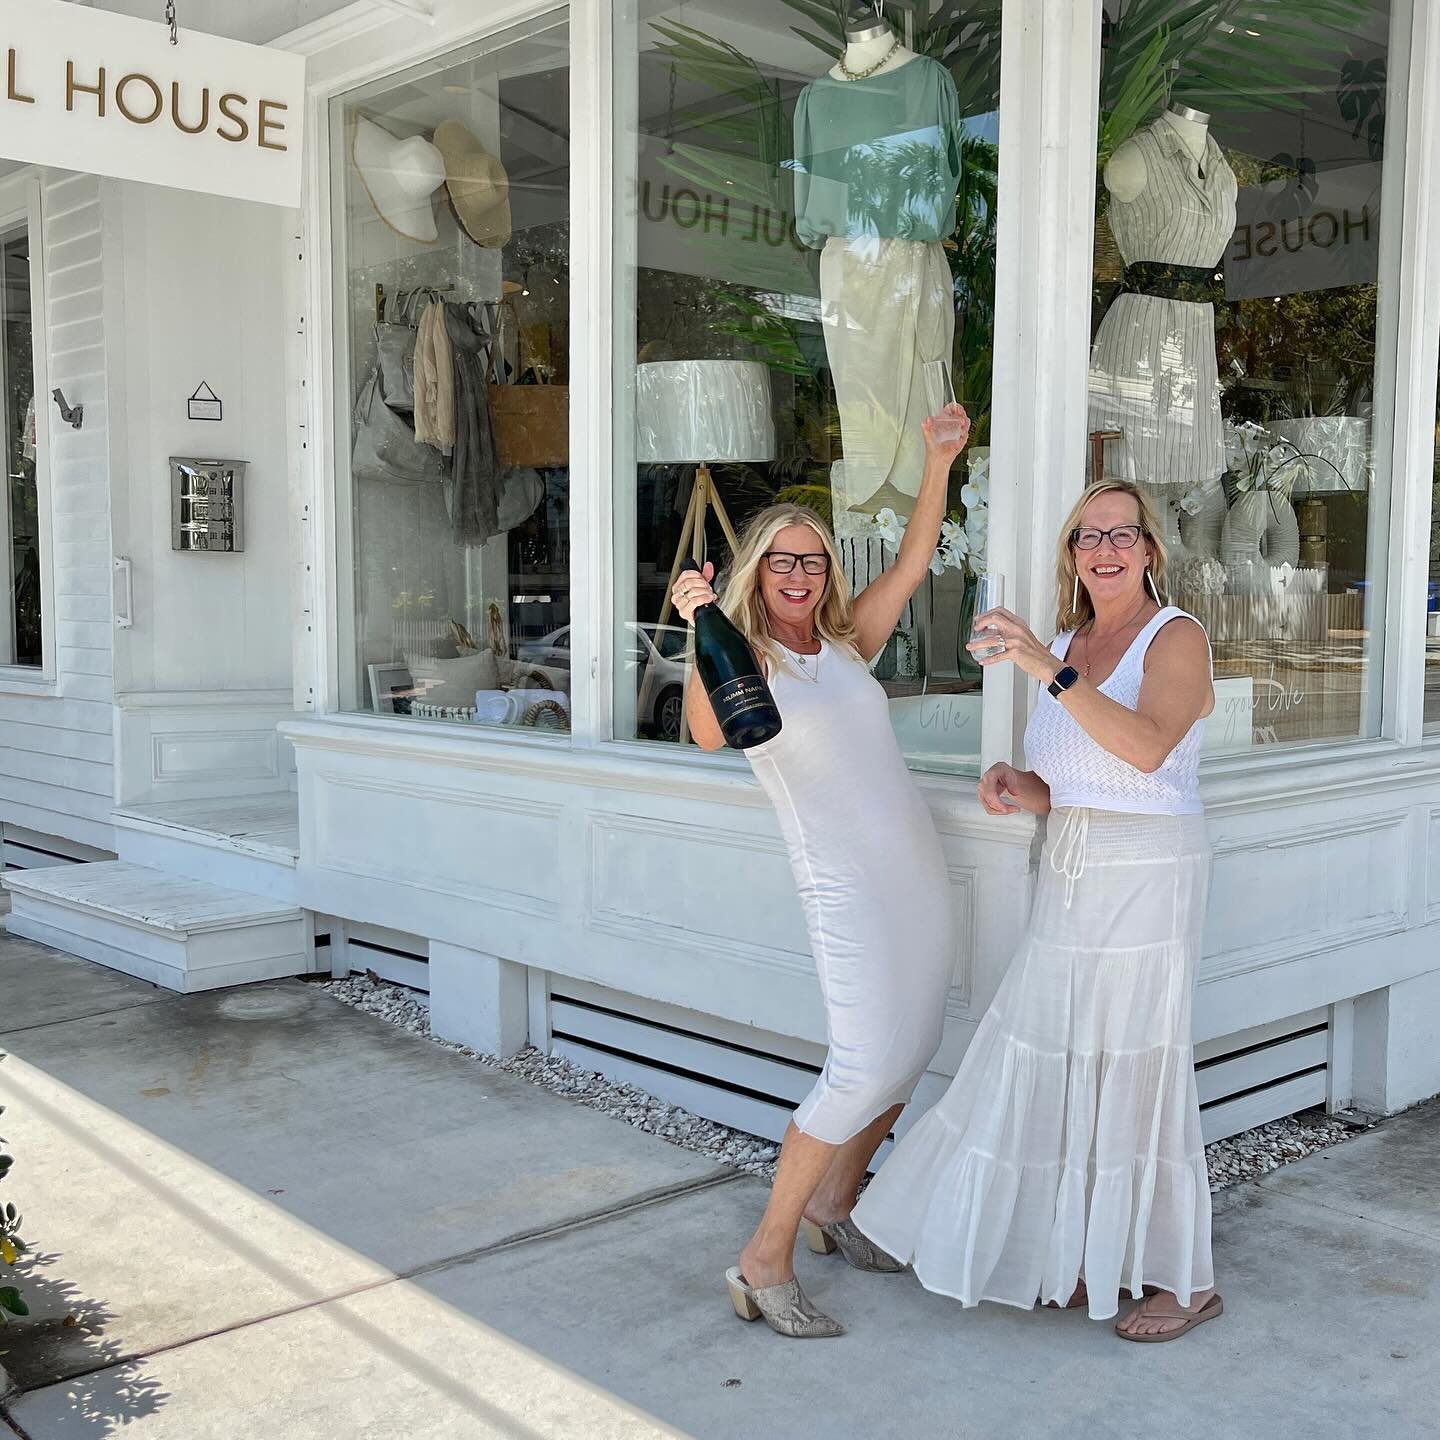 COME CELEBRATE SOUL HOUSE EVOLVING!
After 6 years of ownership together, Sue has become the sole proprietor of Soul House.  She and&nbsp;Oakleigh will continue working together creatively. 

Come share in this celebration with Sue and Oakleigh at Sou